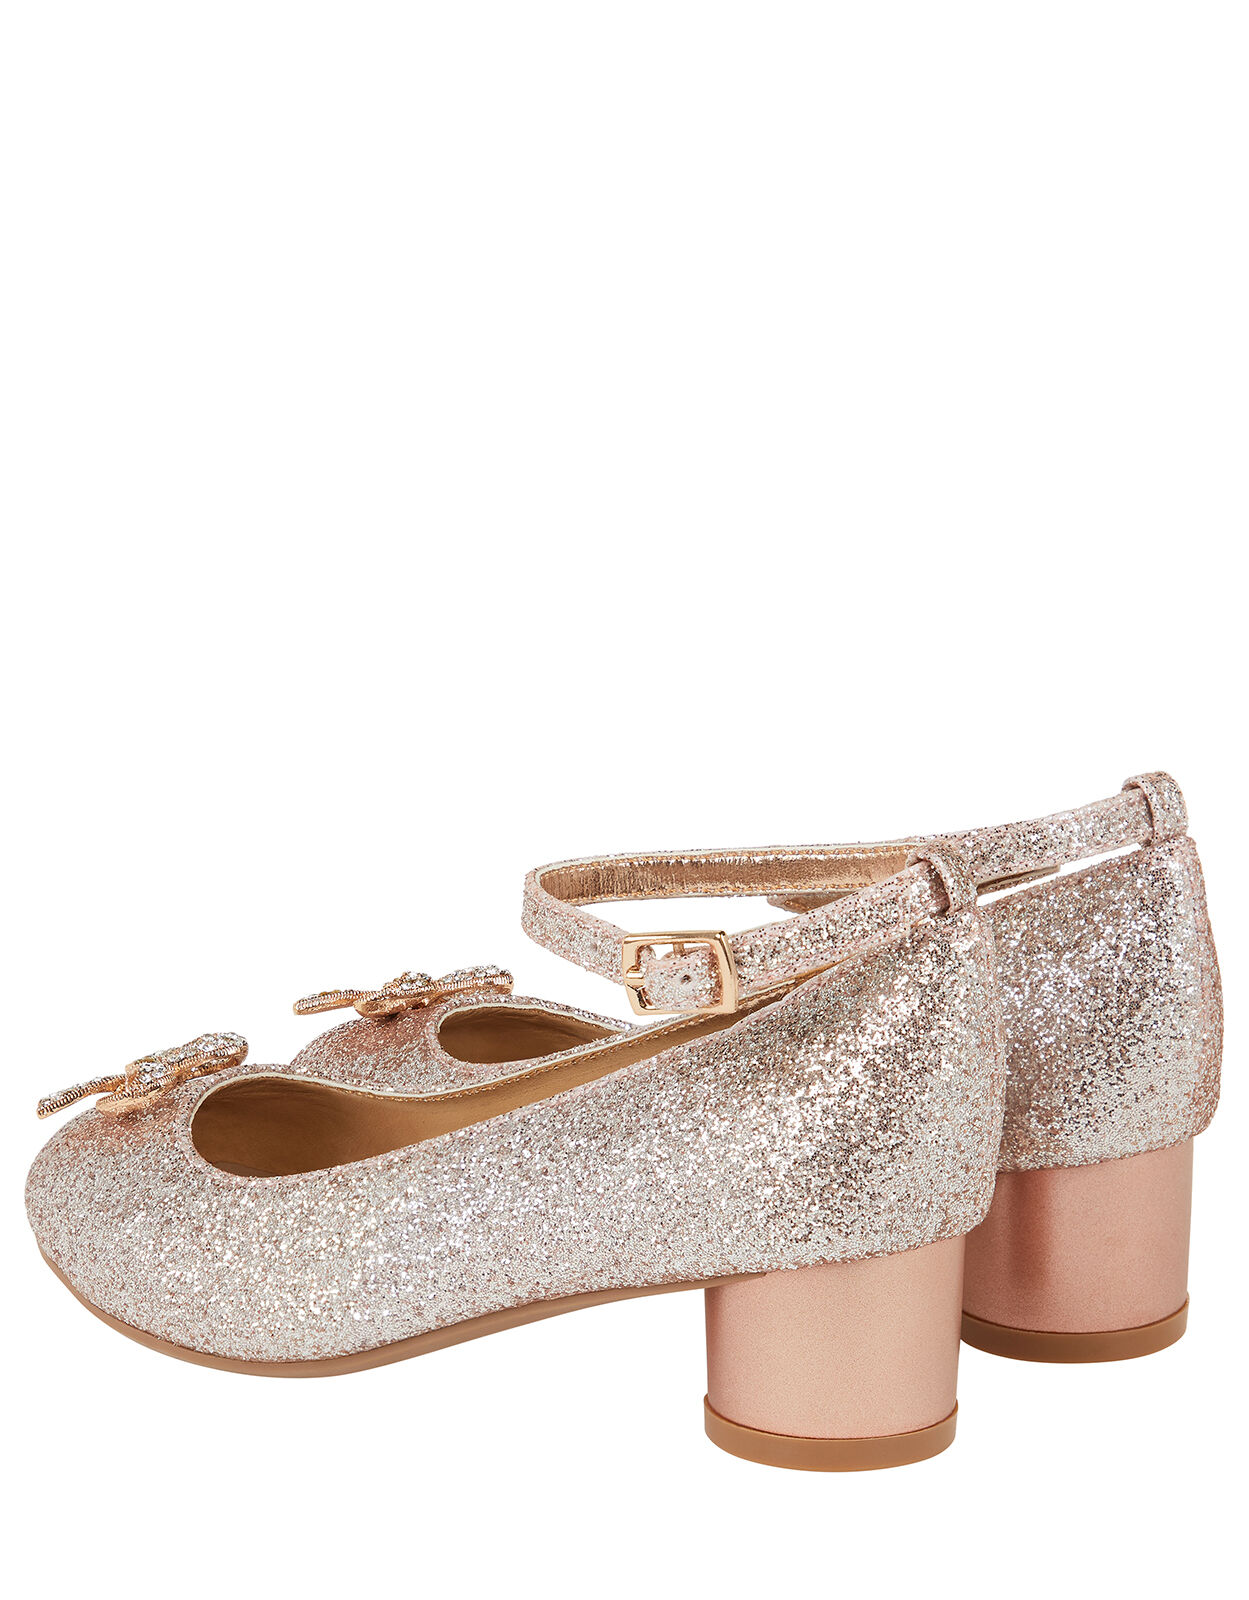 monsoon rose gold shoes